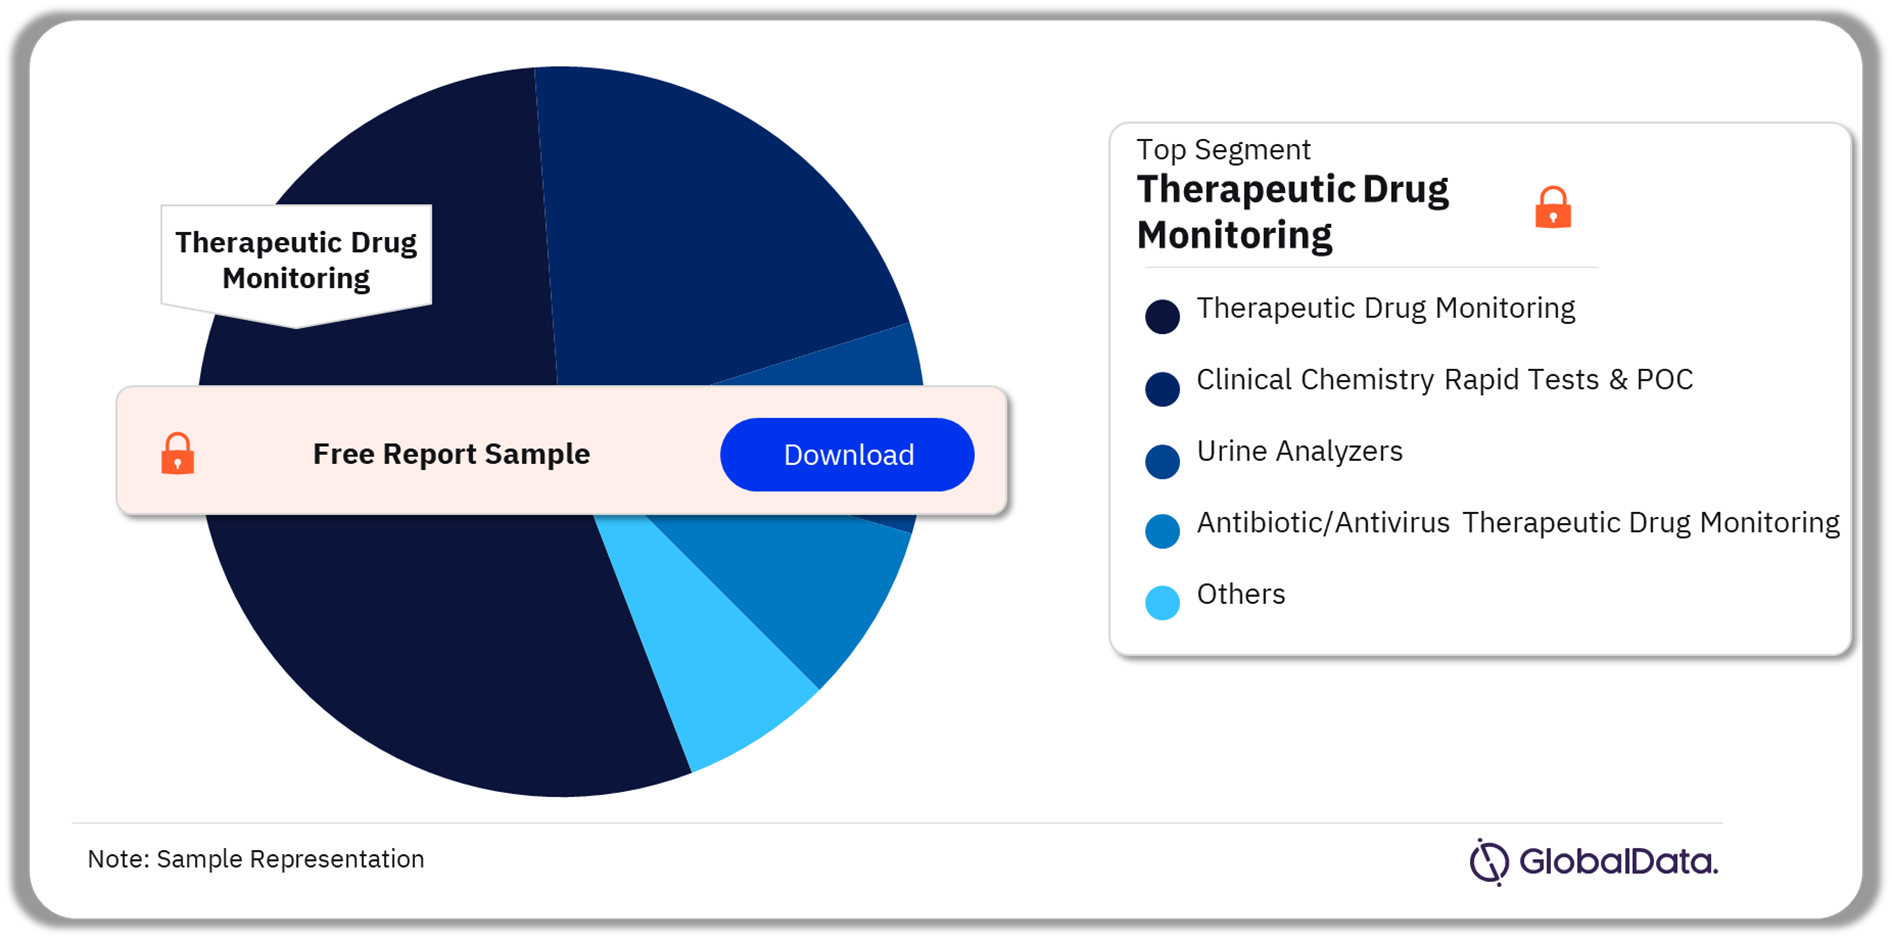 Clinical Chemistry Pipeline Market Analysis by Segments, 2023 (%)